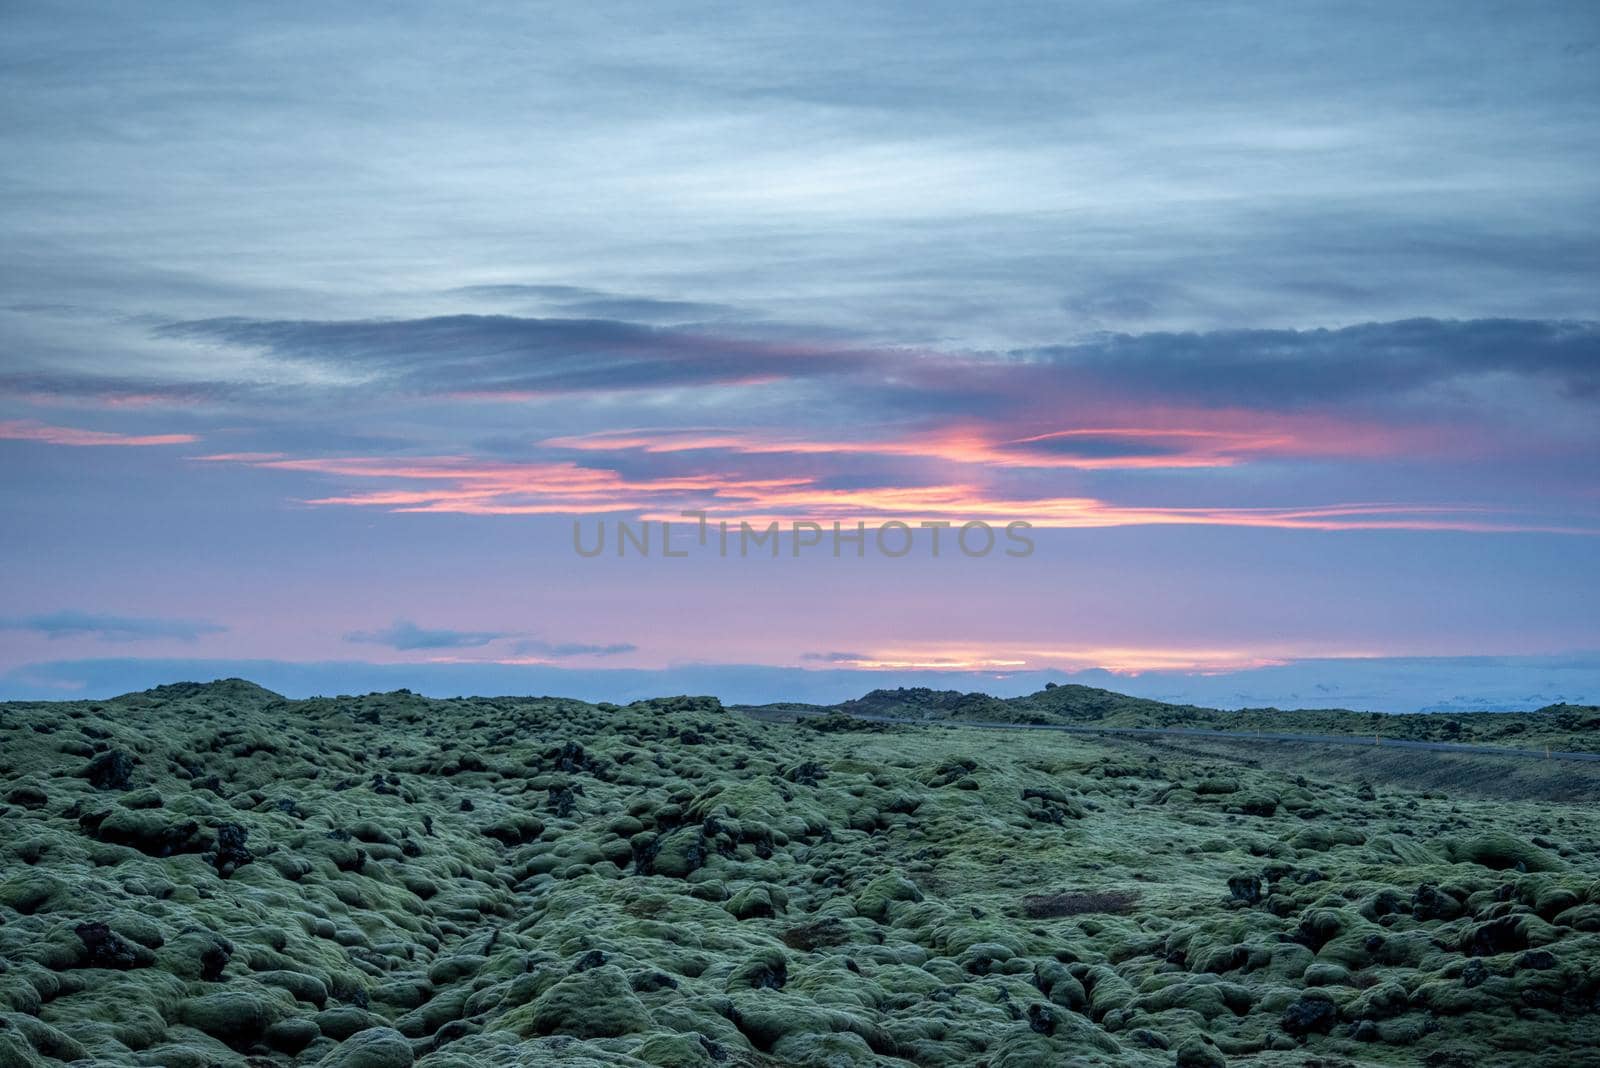 Icelandic landscape photo at sunset with volcanic rock field covered in green moss by jyurinko